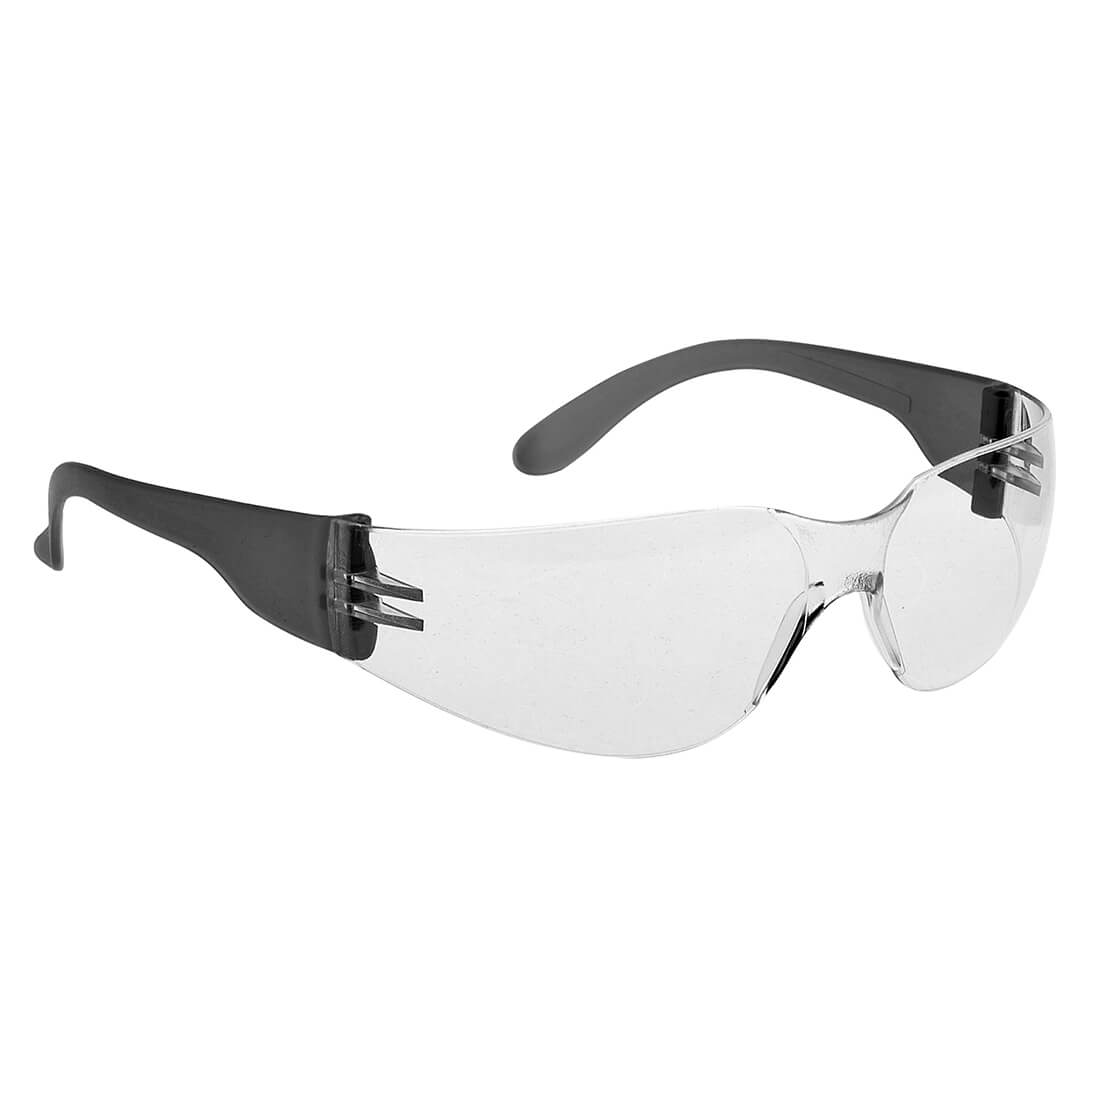 Image of Portwest Wrap Around Safety Glasses Black Clear